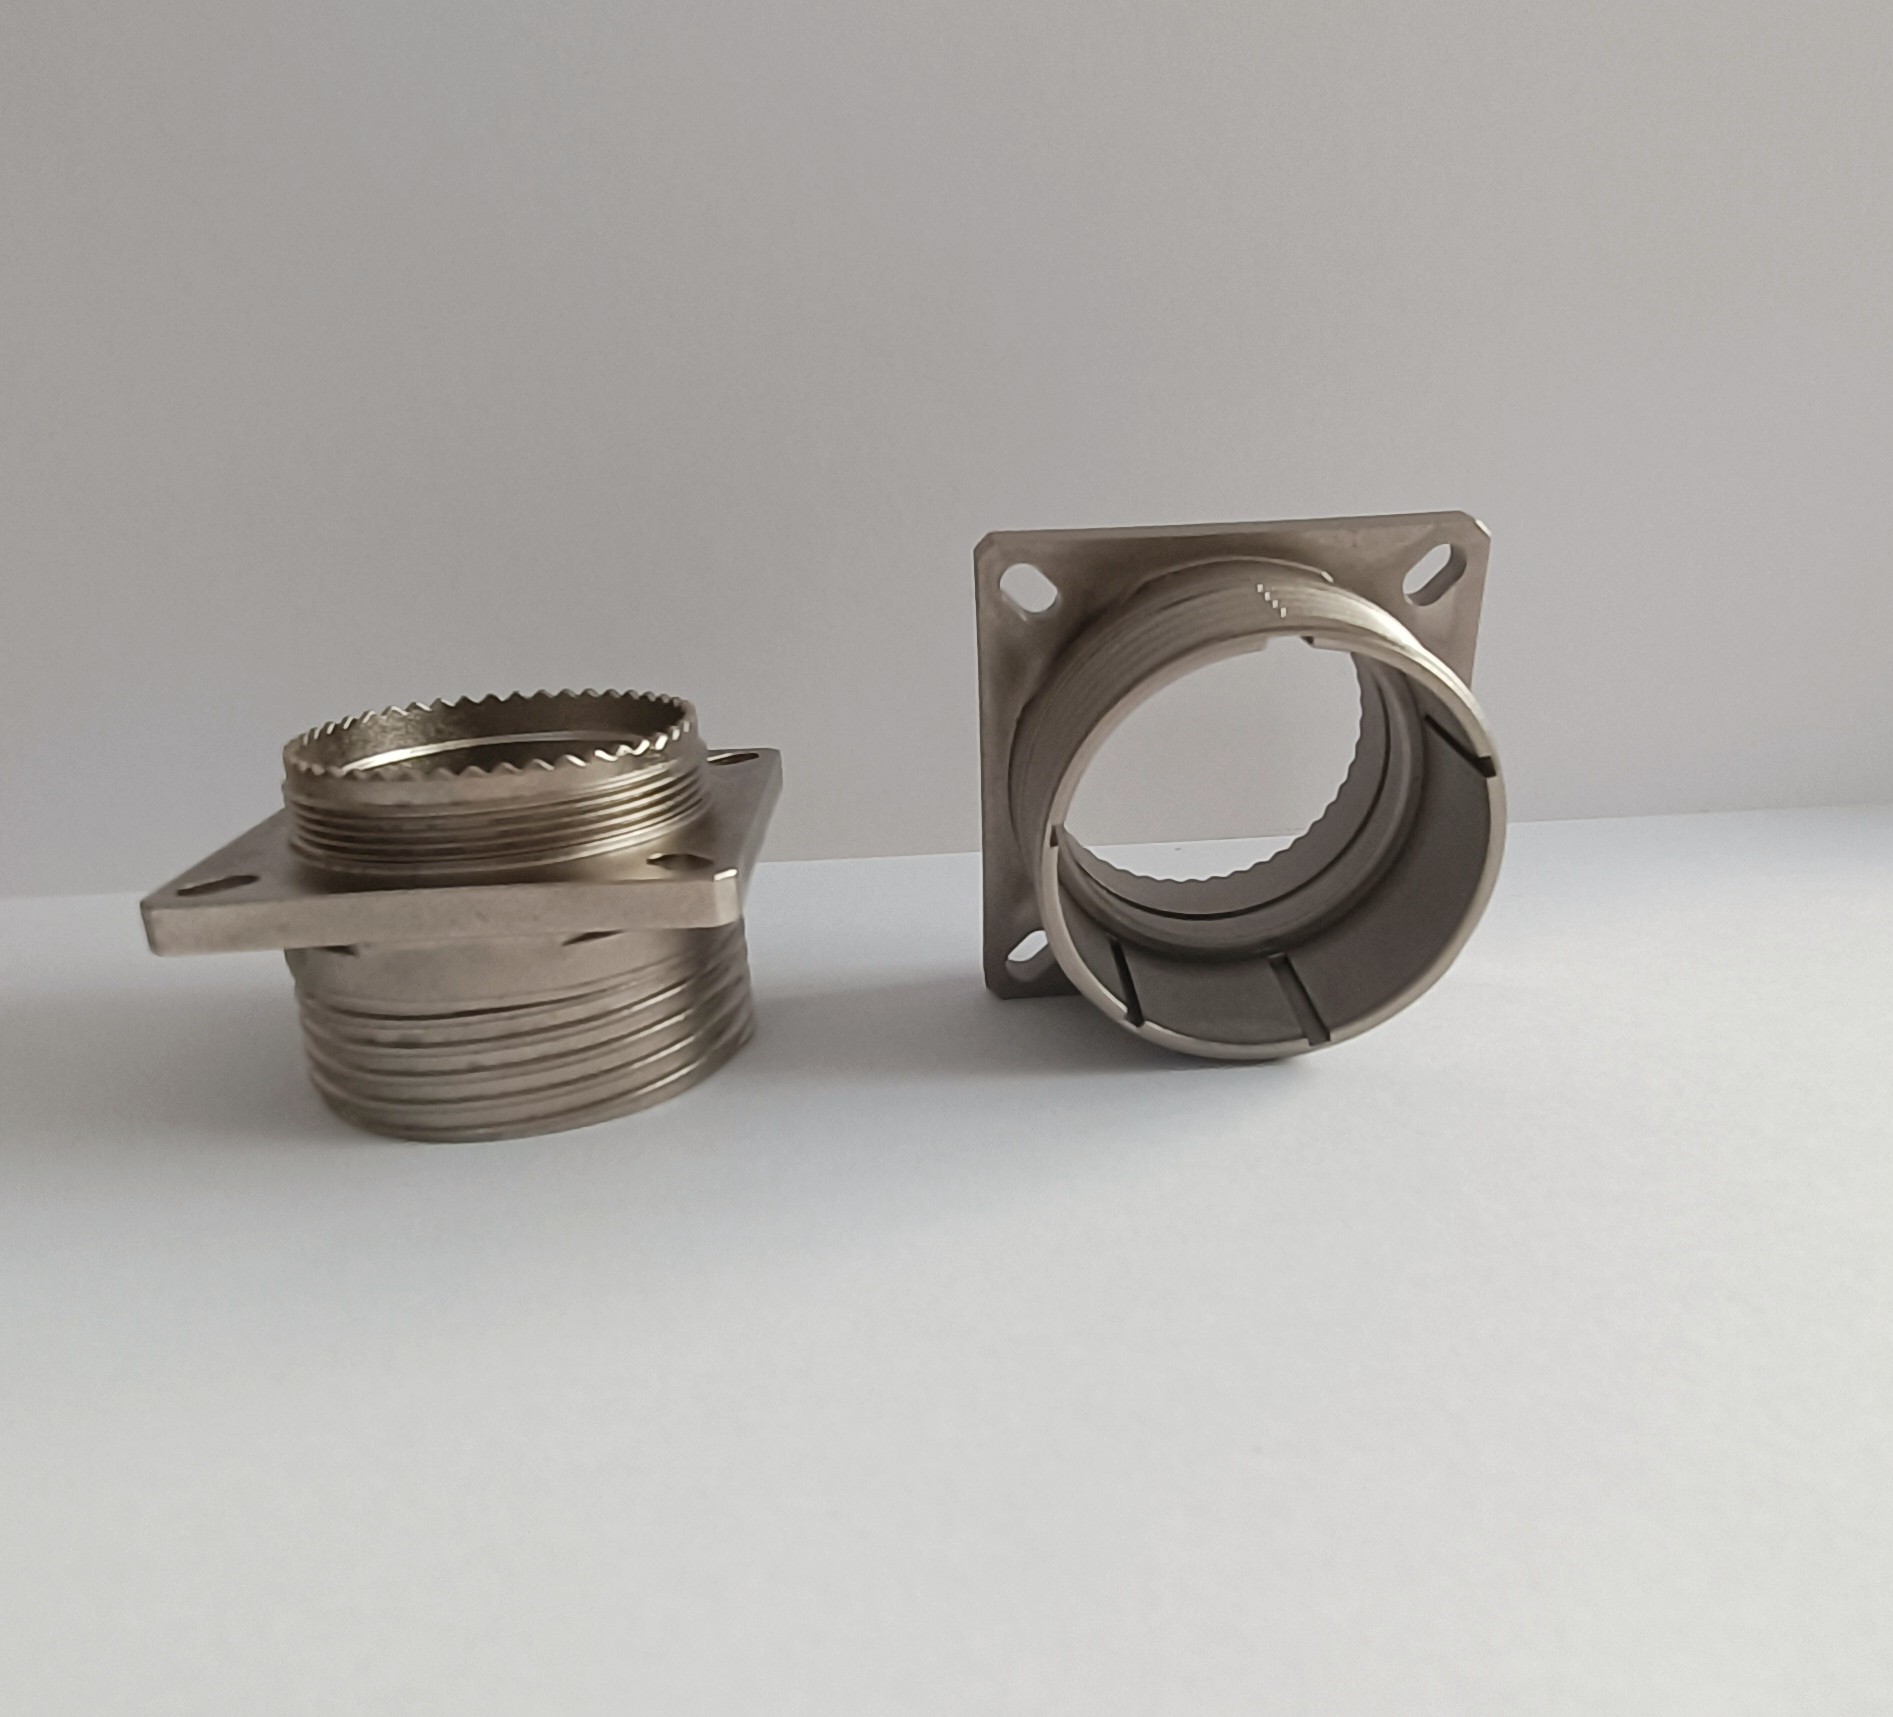 Engineering plastic devices metallized PEI plating nickel, copper, gold, silver